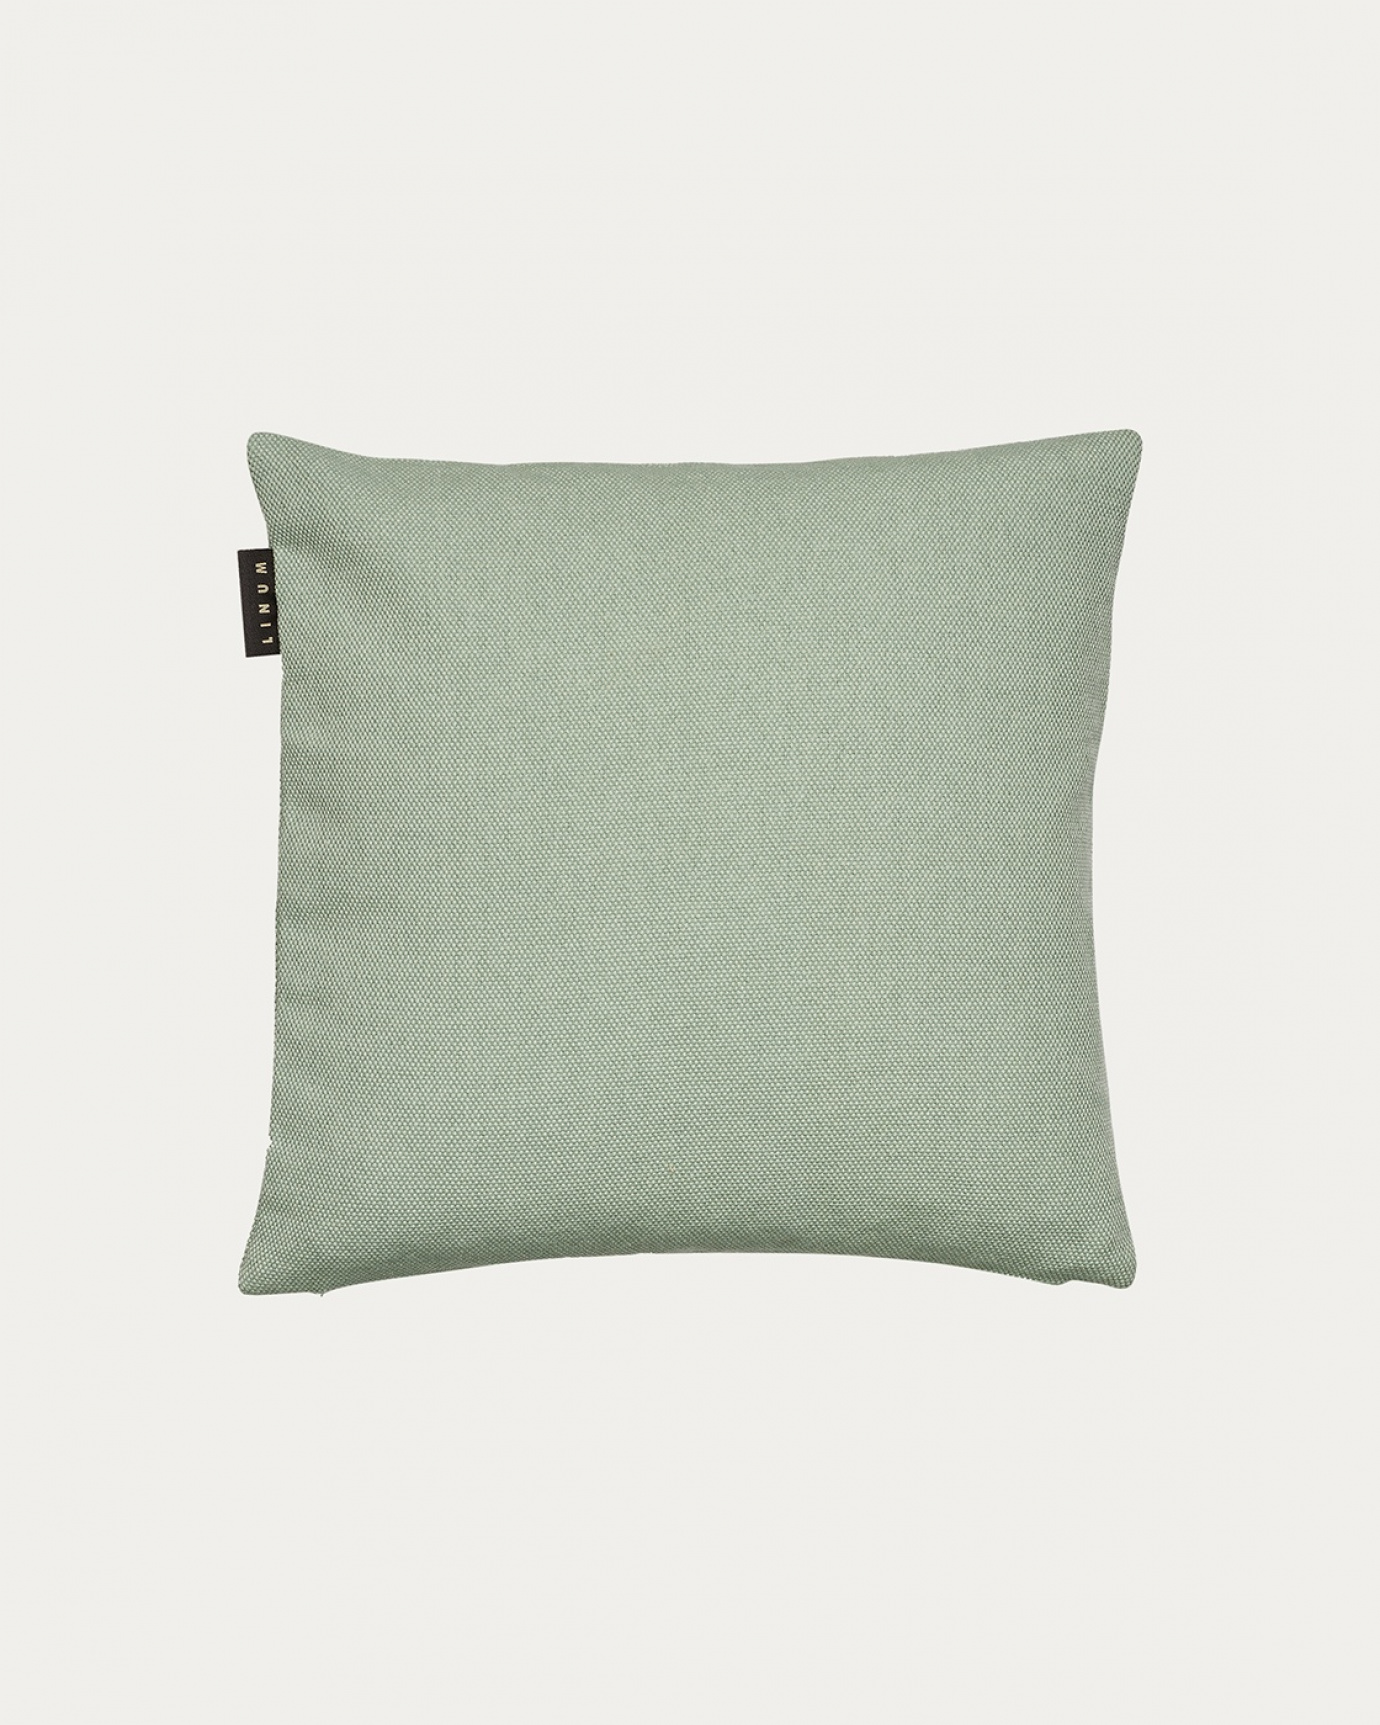 Product image light ice green PEPPER cushion cover made of soft cotton from LINUM DESIGN. Easy to wash and durable for generations. Size 40x40 cm.